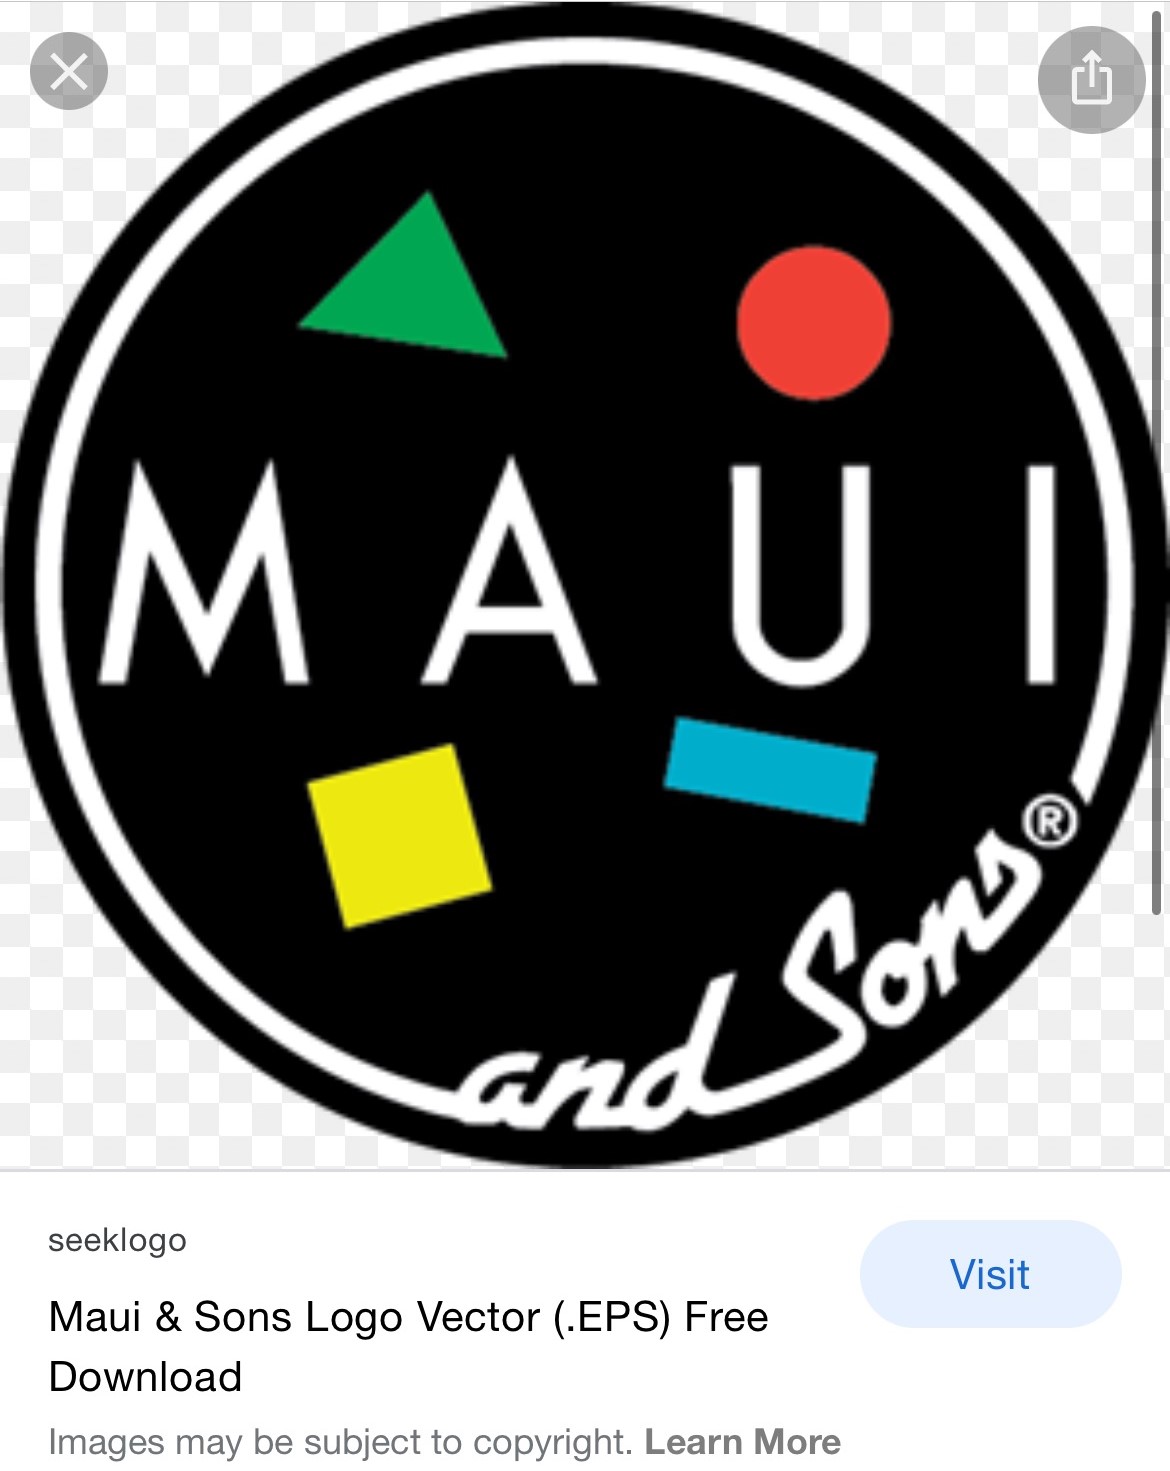 Image of a circular Maui and Sons logo with a few bright colors and geometric shapes 